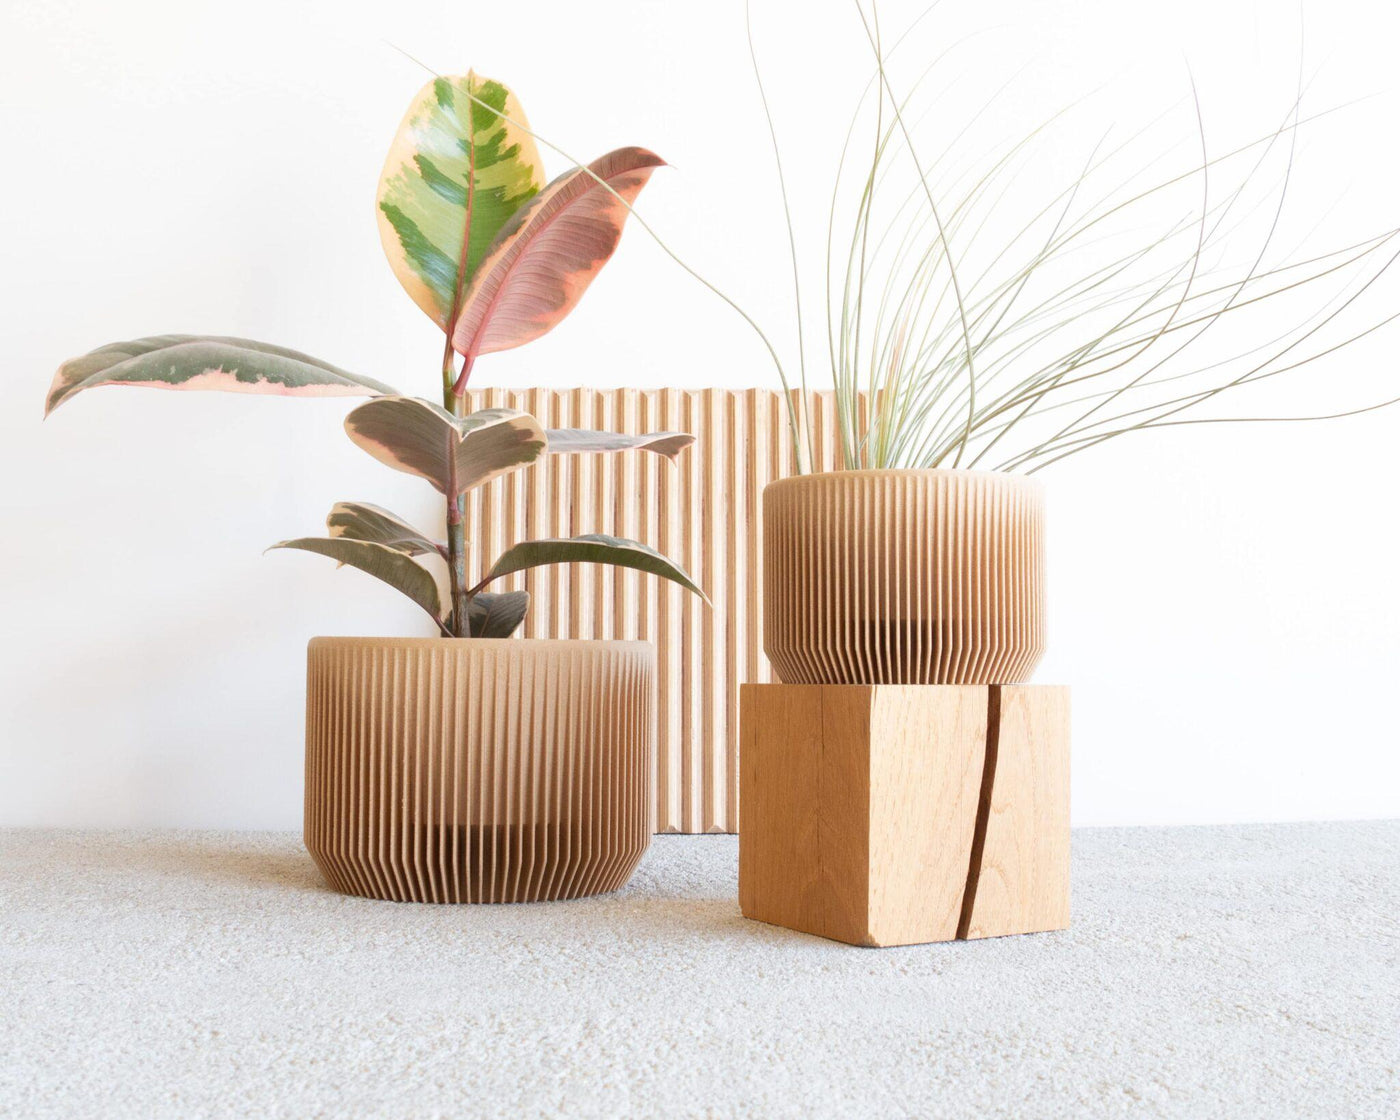 Pots and planters nula haus collection image